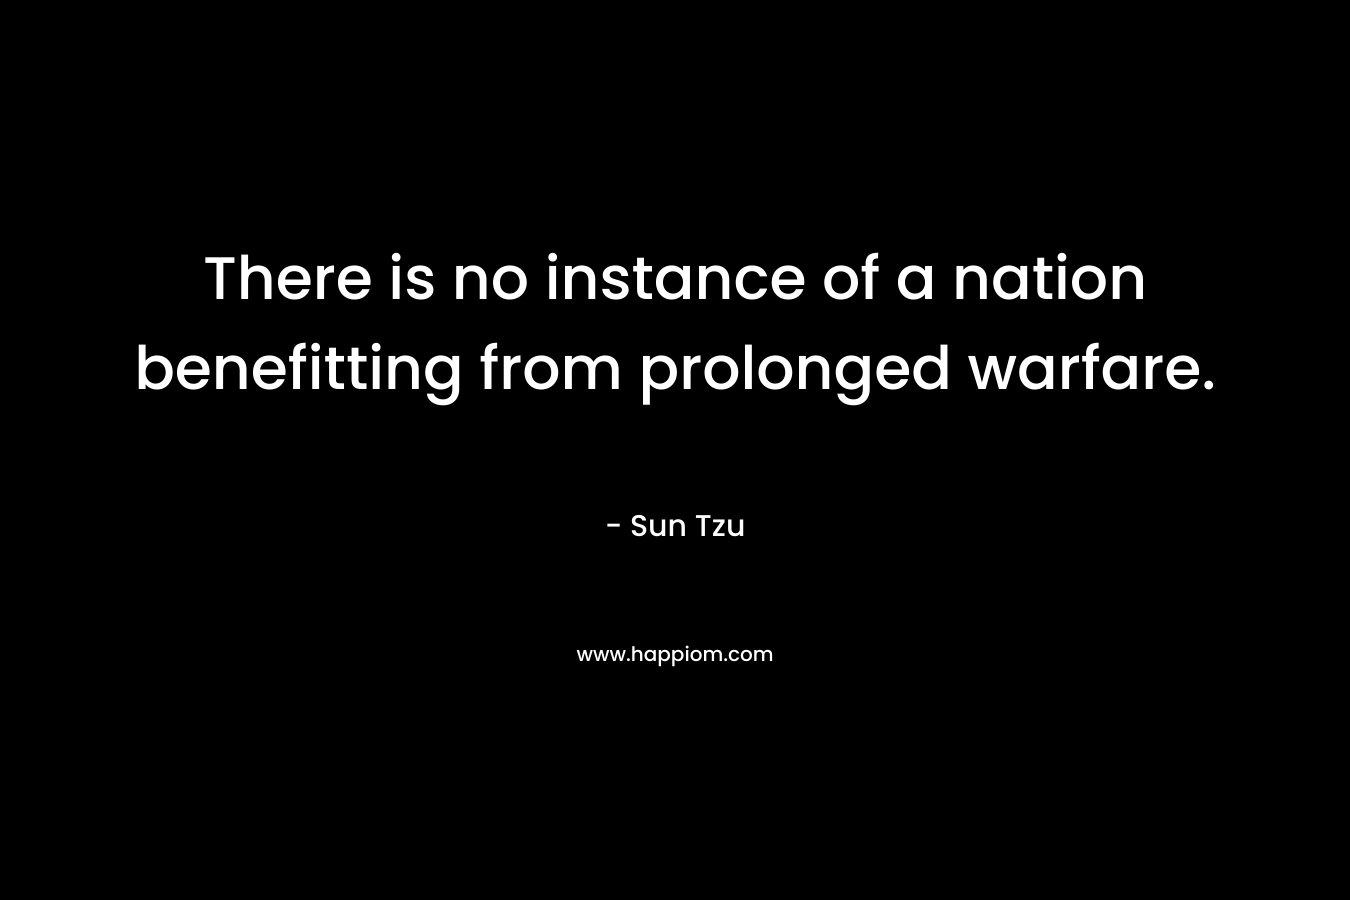 There is no instance of a nation benefitting from prolonged warfare. – Sun Tzu